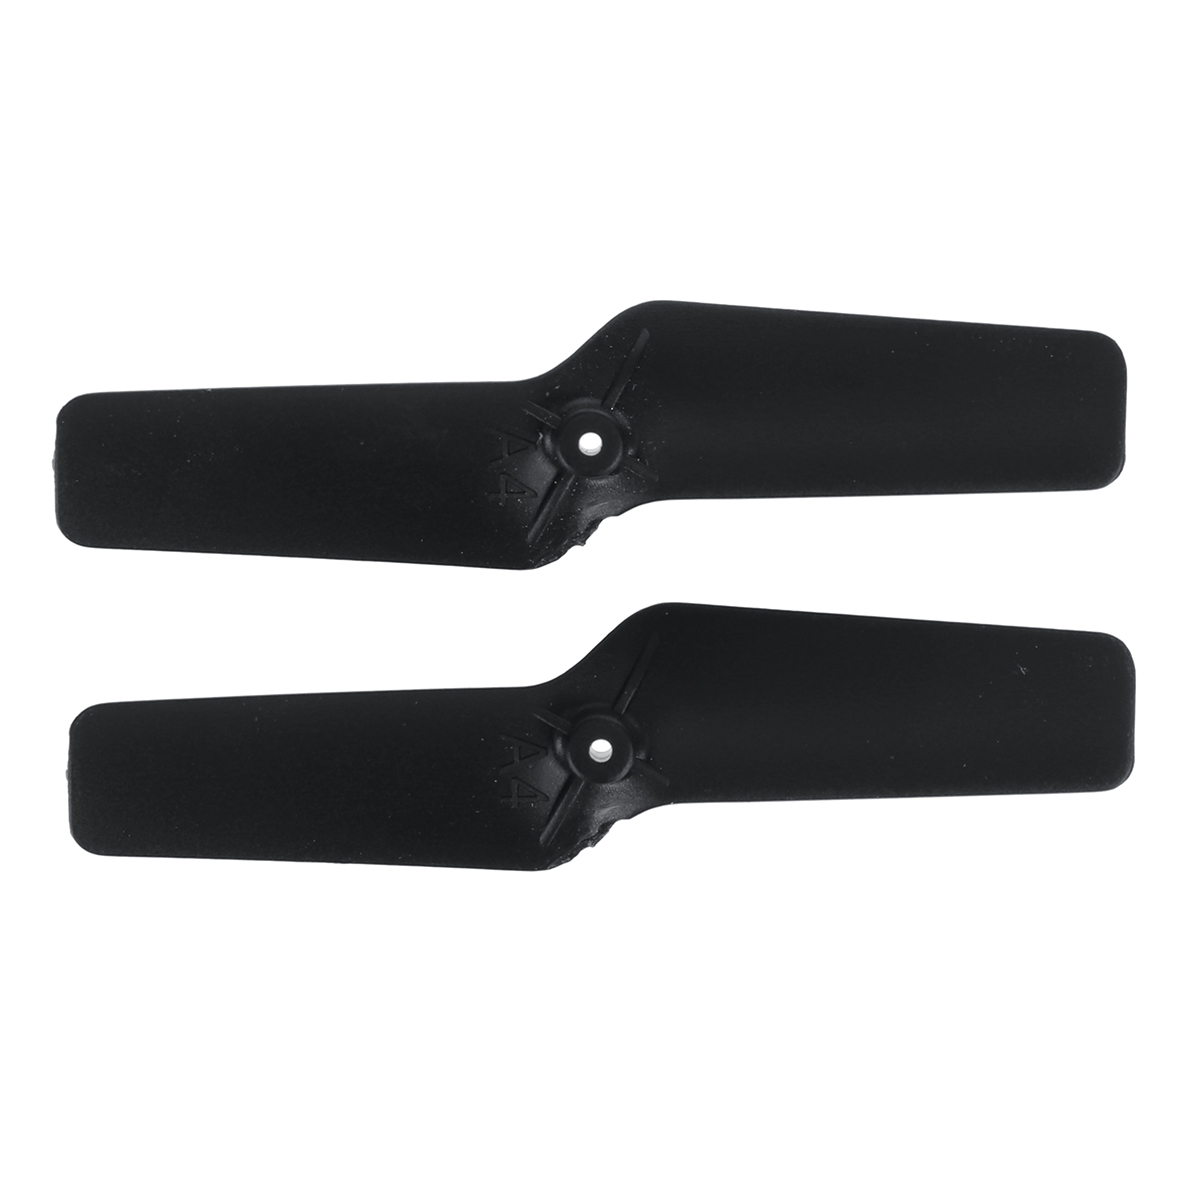 Eachine E110 Tail Blade RC Helicopter Parts